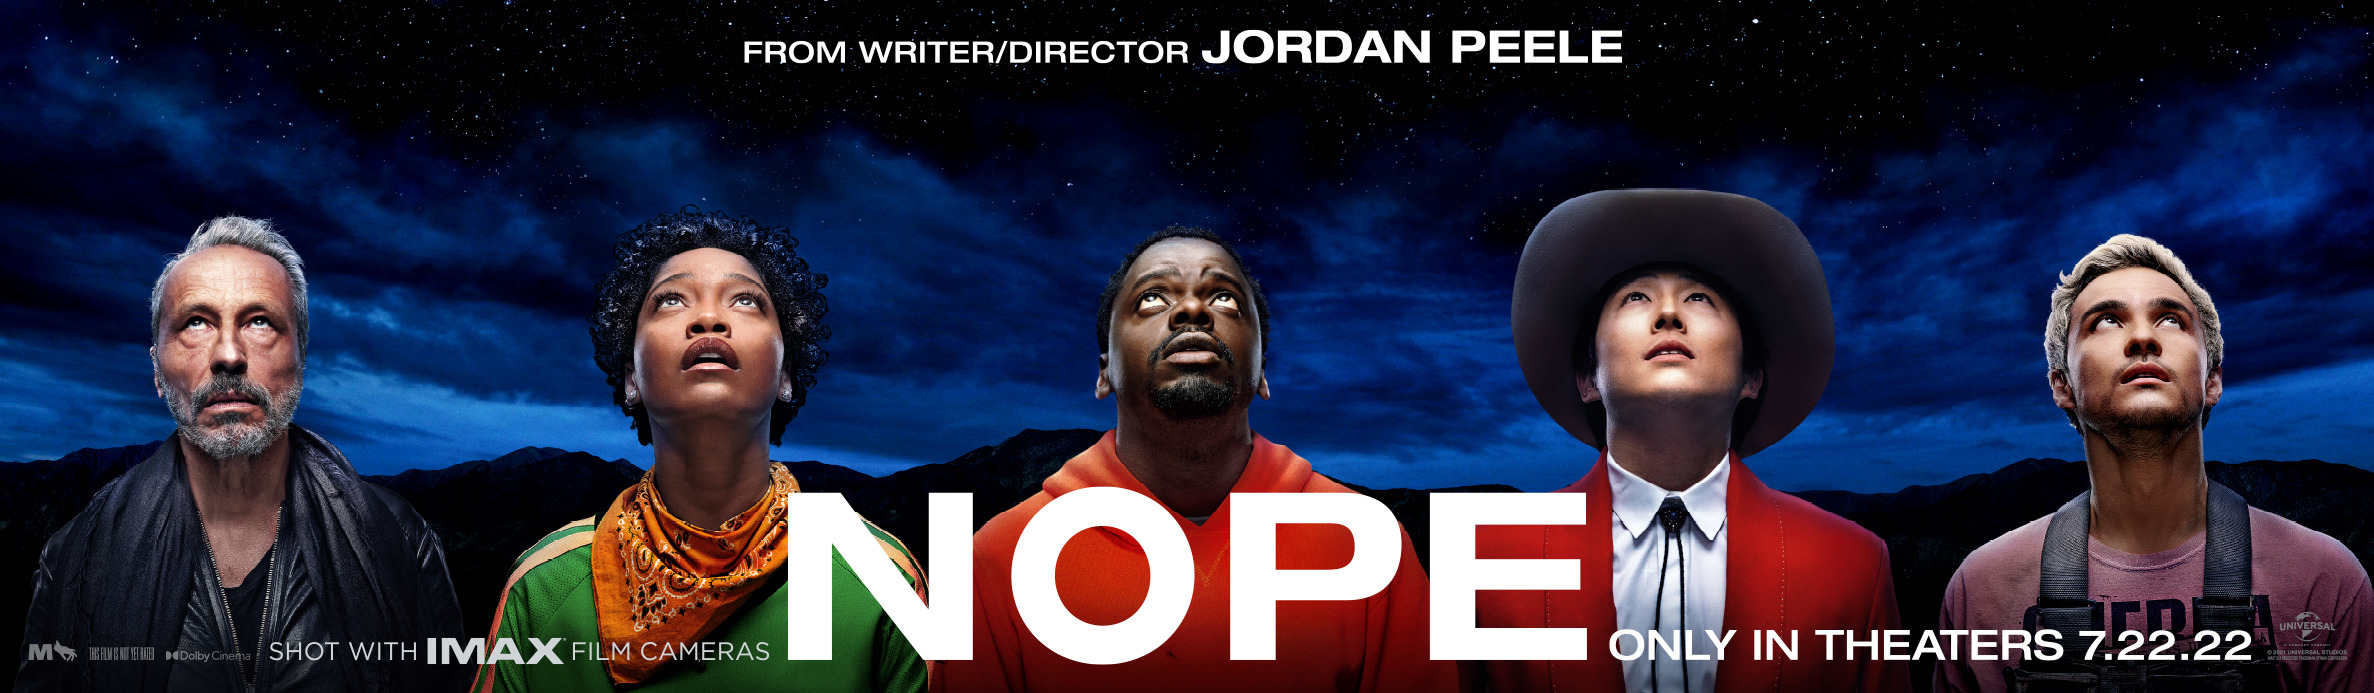 Mega Sized Movie Poster Image for Nope (#15 of 16)